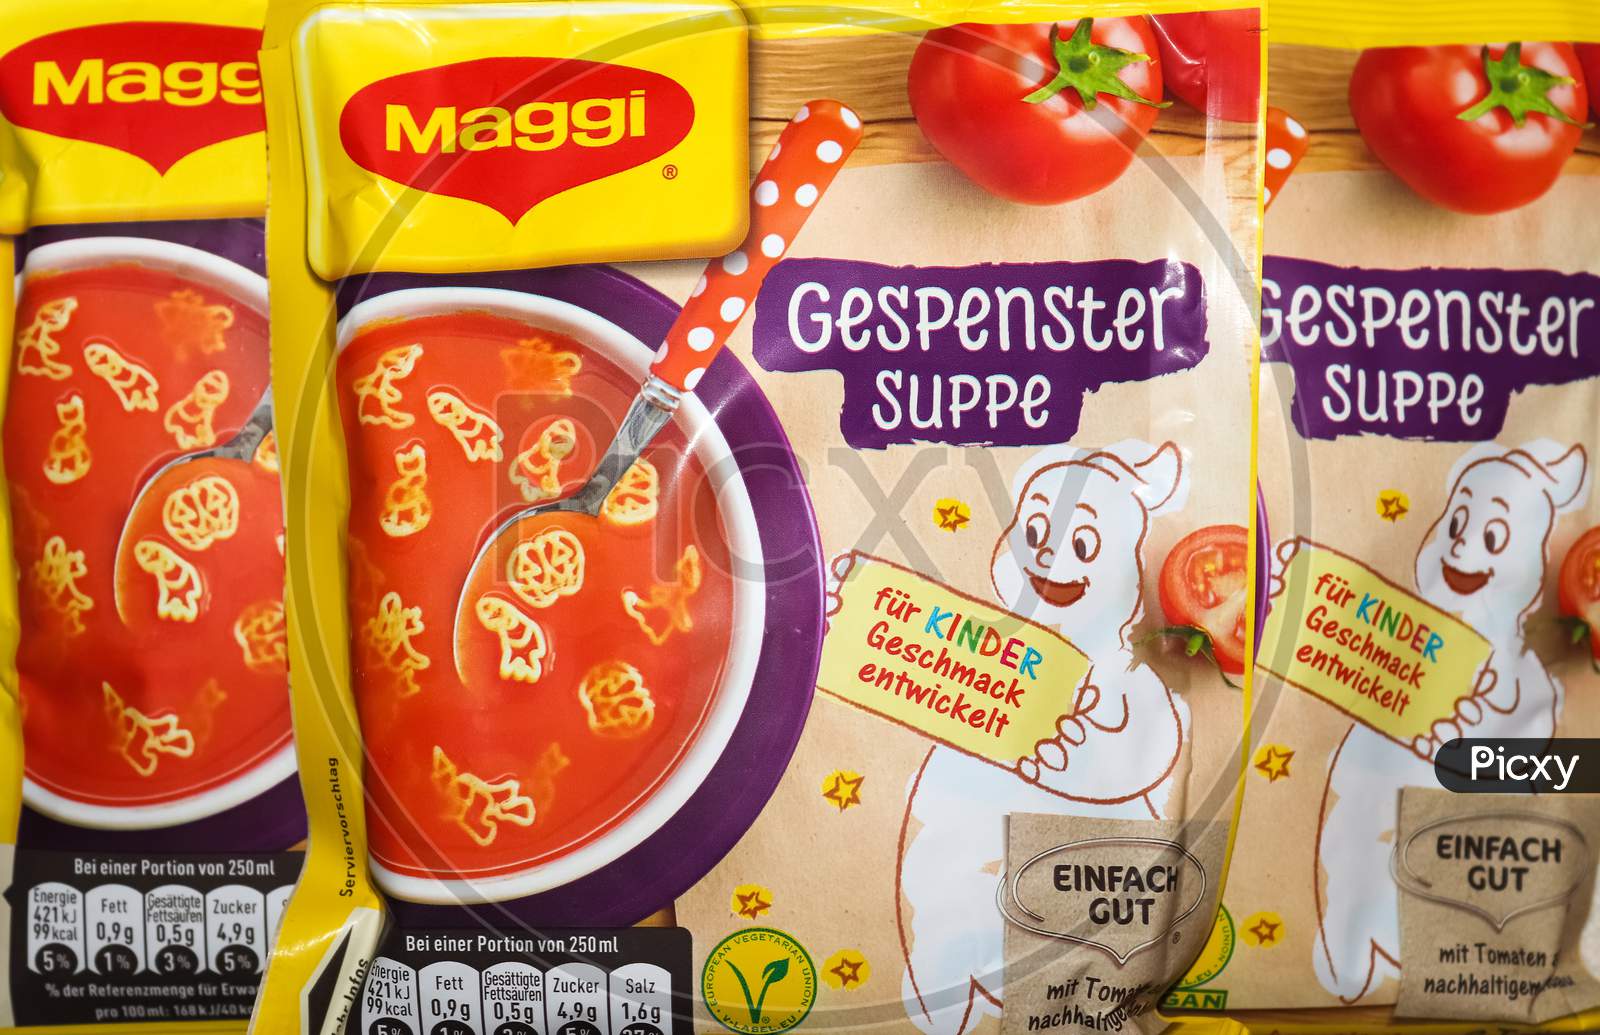 German Maggi Instant Noodles Called Gespenstersuppe Owned By Nestle, Maggi Is An International Brand Of Soups, Stocks, Bouillon Cubes, Ketchup, Sauces, Seasonings And Instant Noodles.